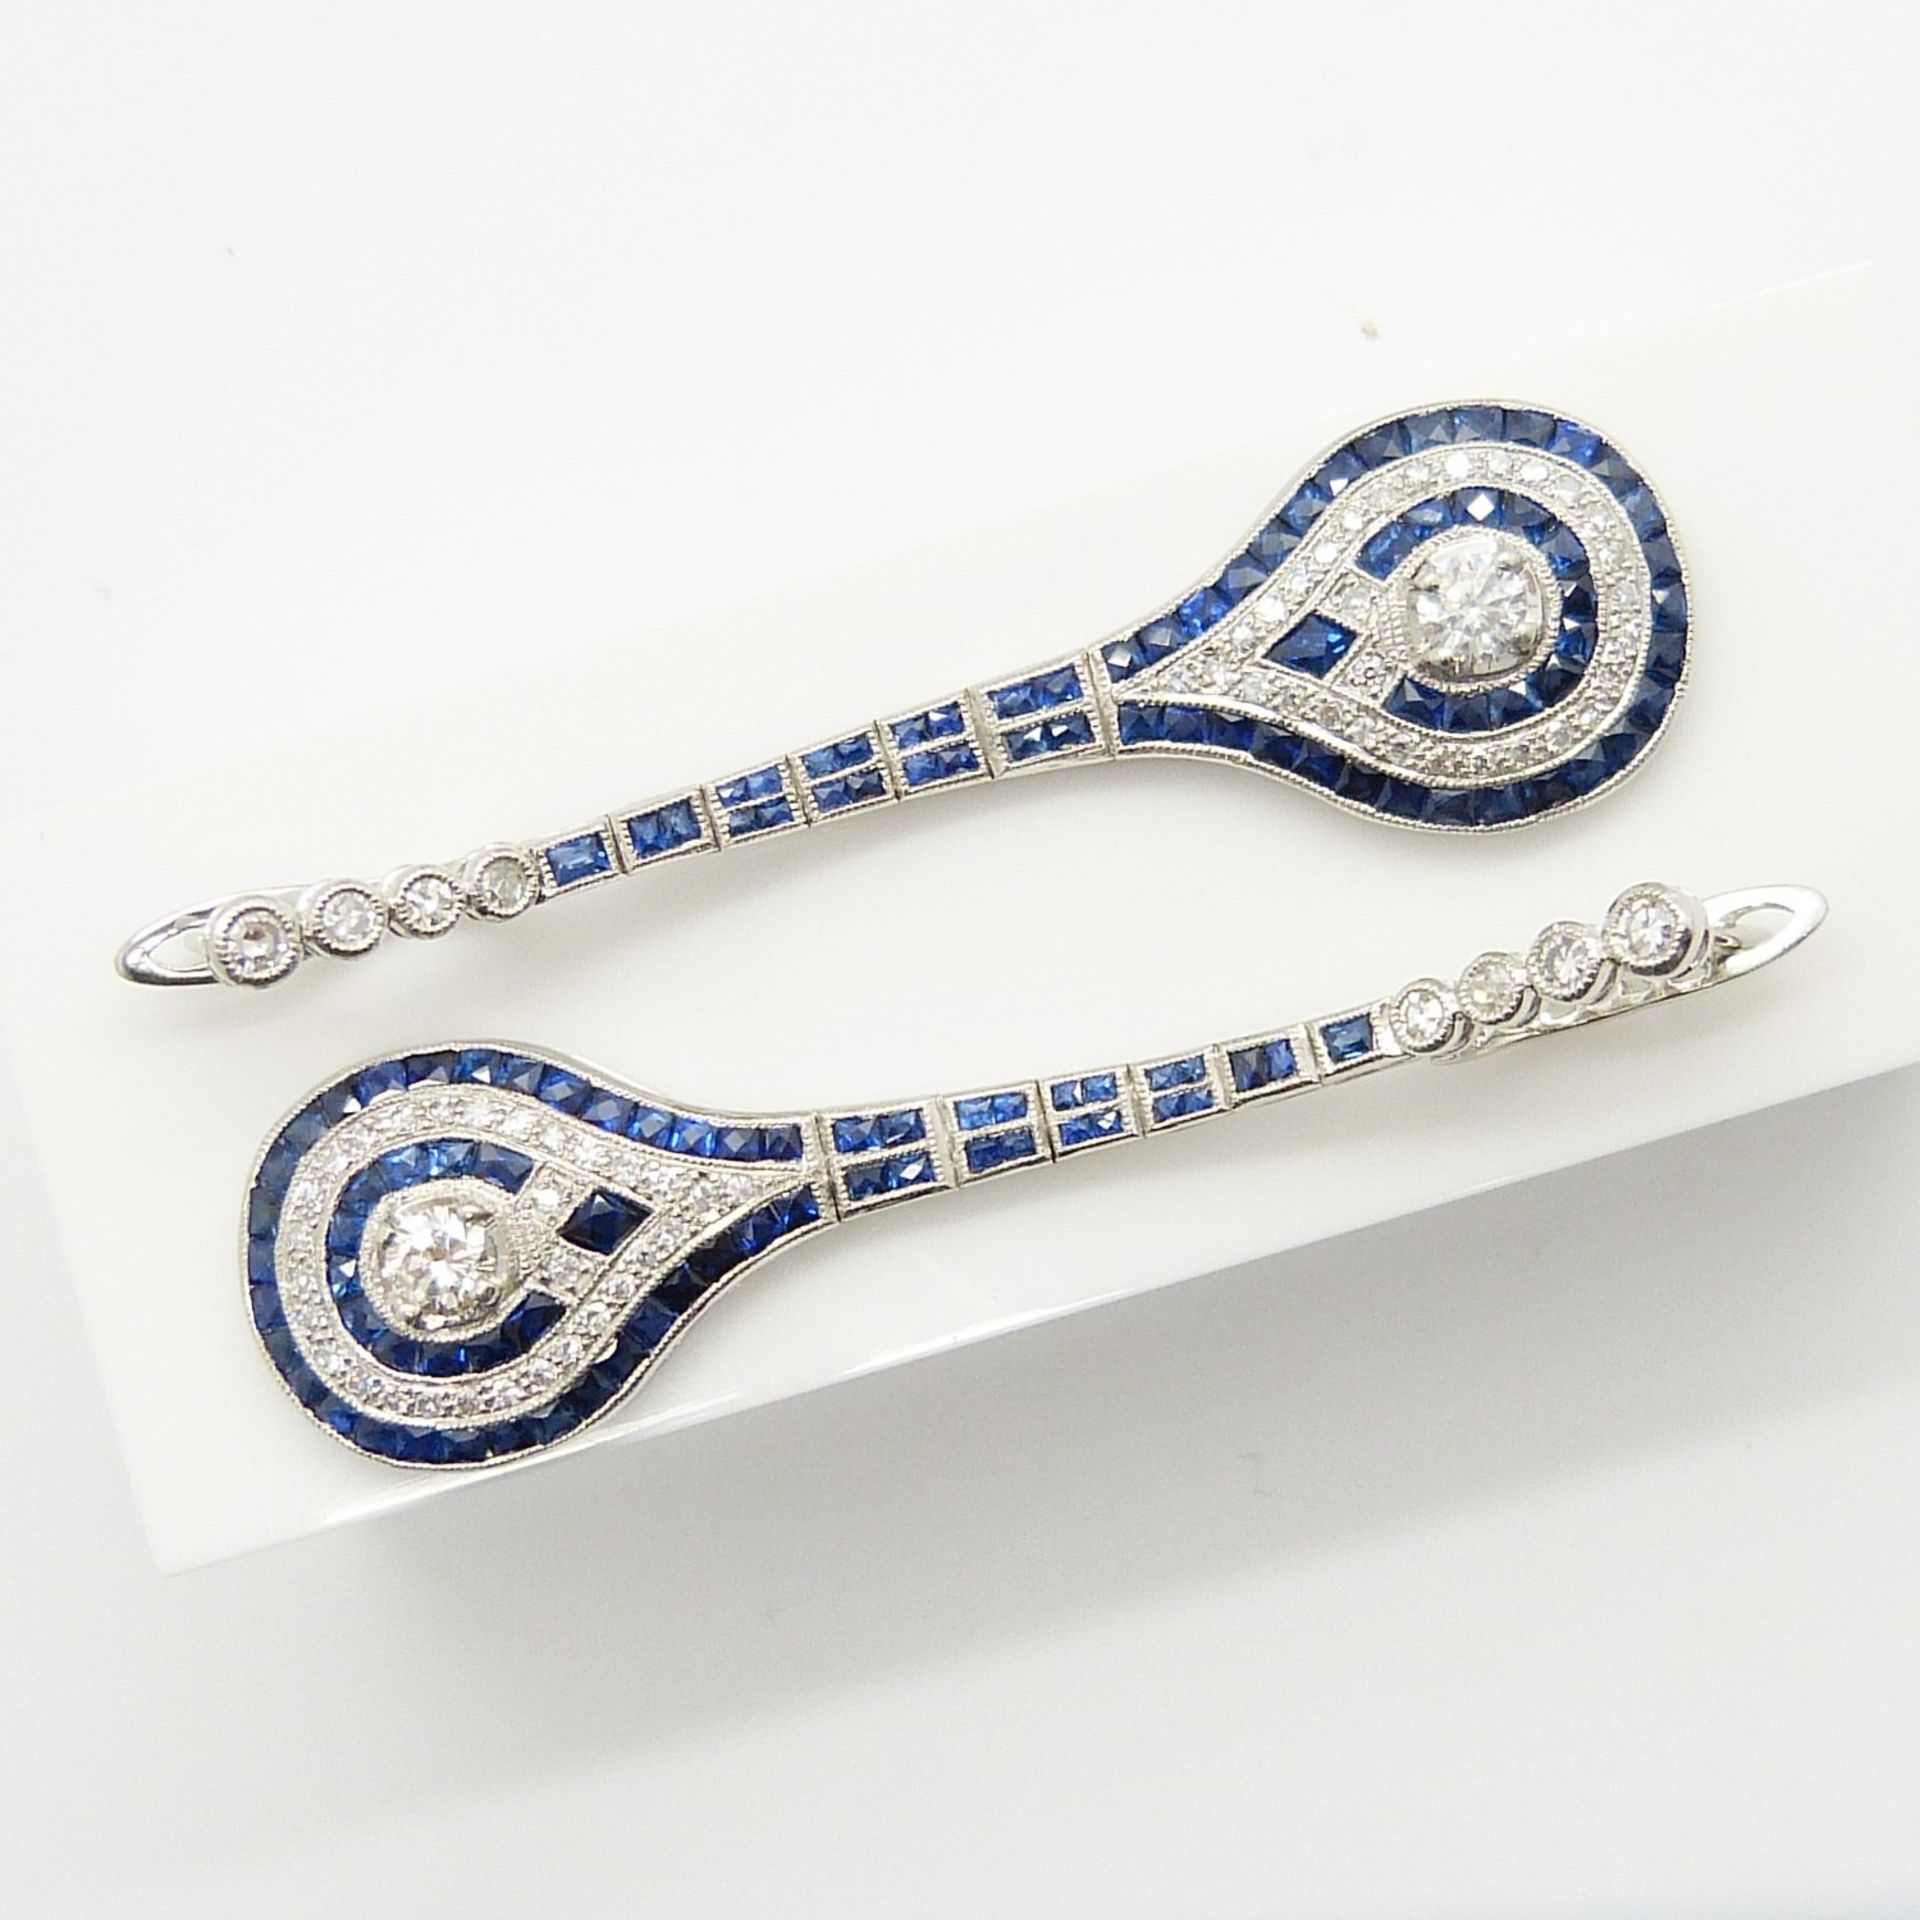 An outstanding pair of vintage-style long drop earrings set with diamonds and sapphires, boxed - Image 3 of 8